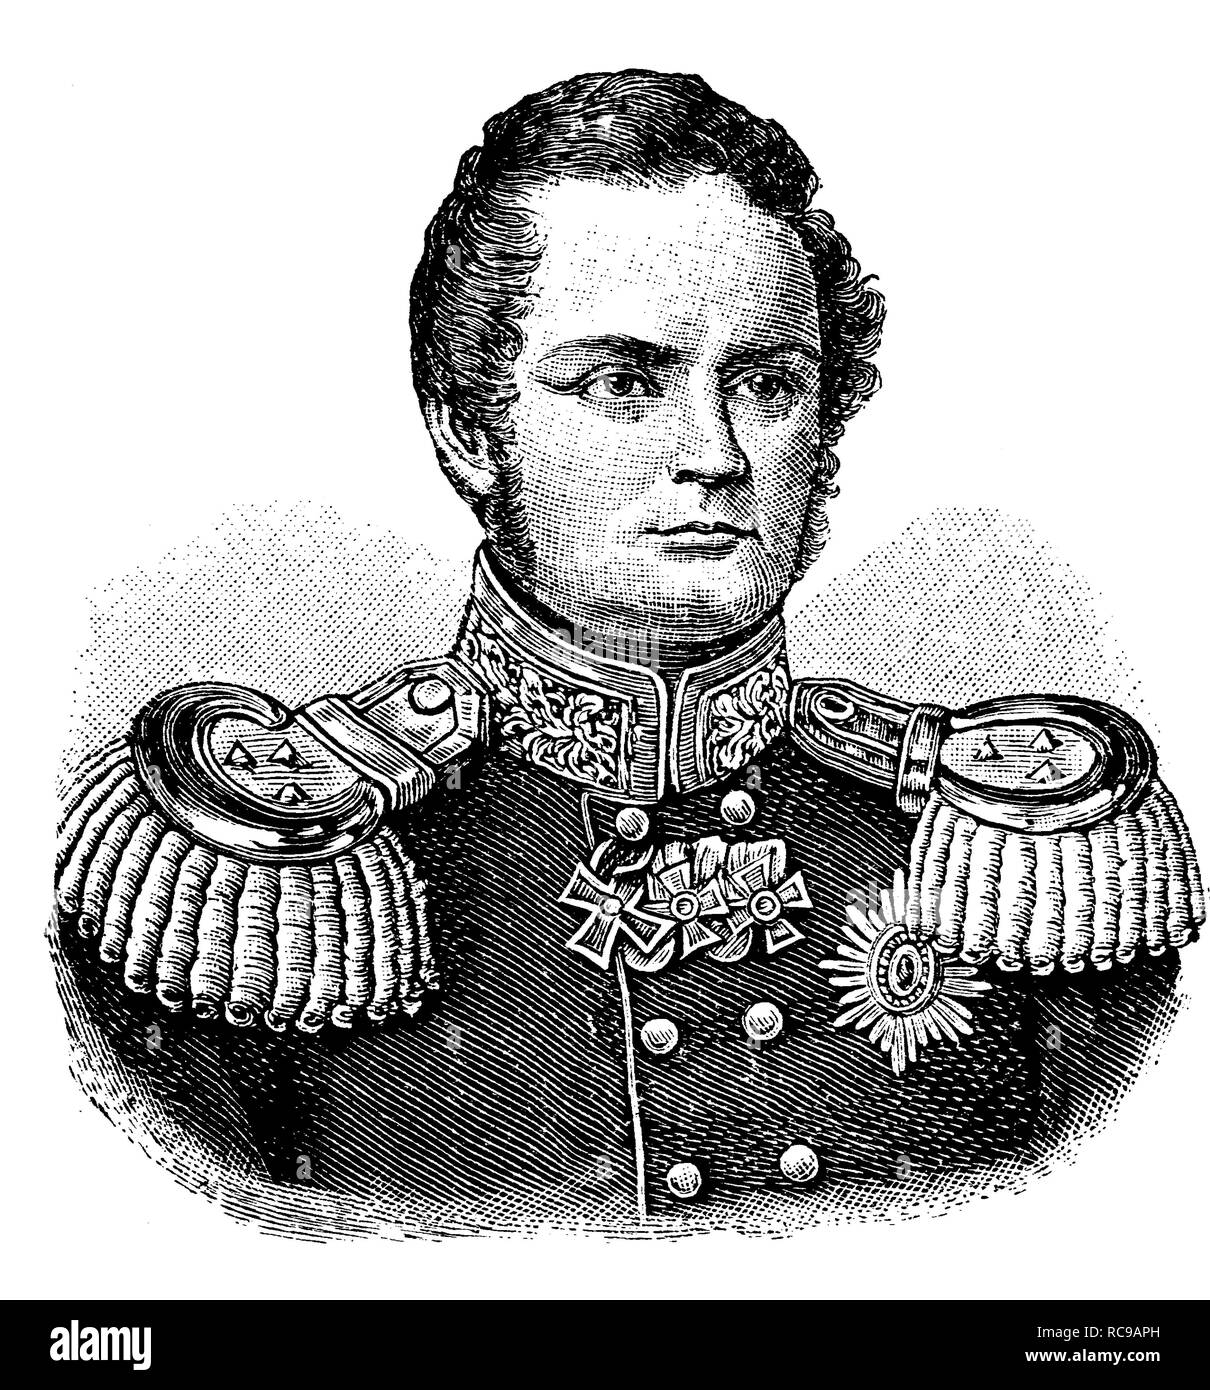 Friedrich Wilhelm IV, Frederick William IV of Prussia, 1795-1861, King of Prussia, historic woodcut, c. 1880 Stock Photo